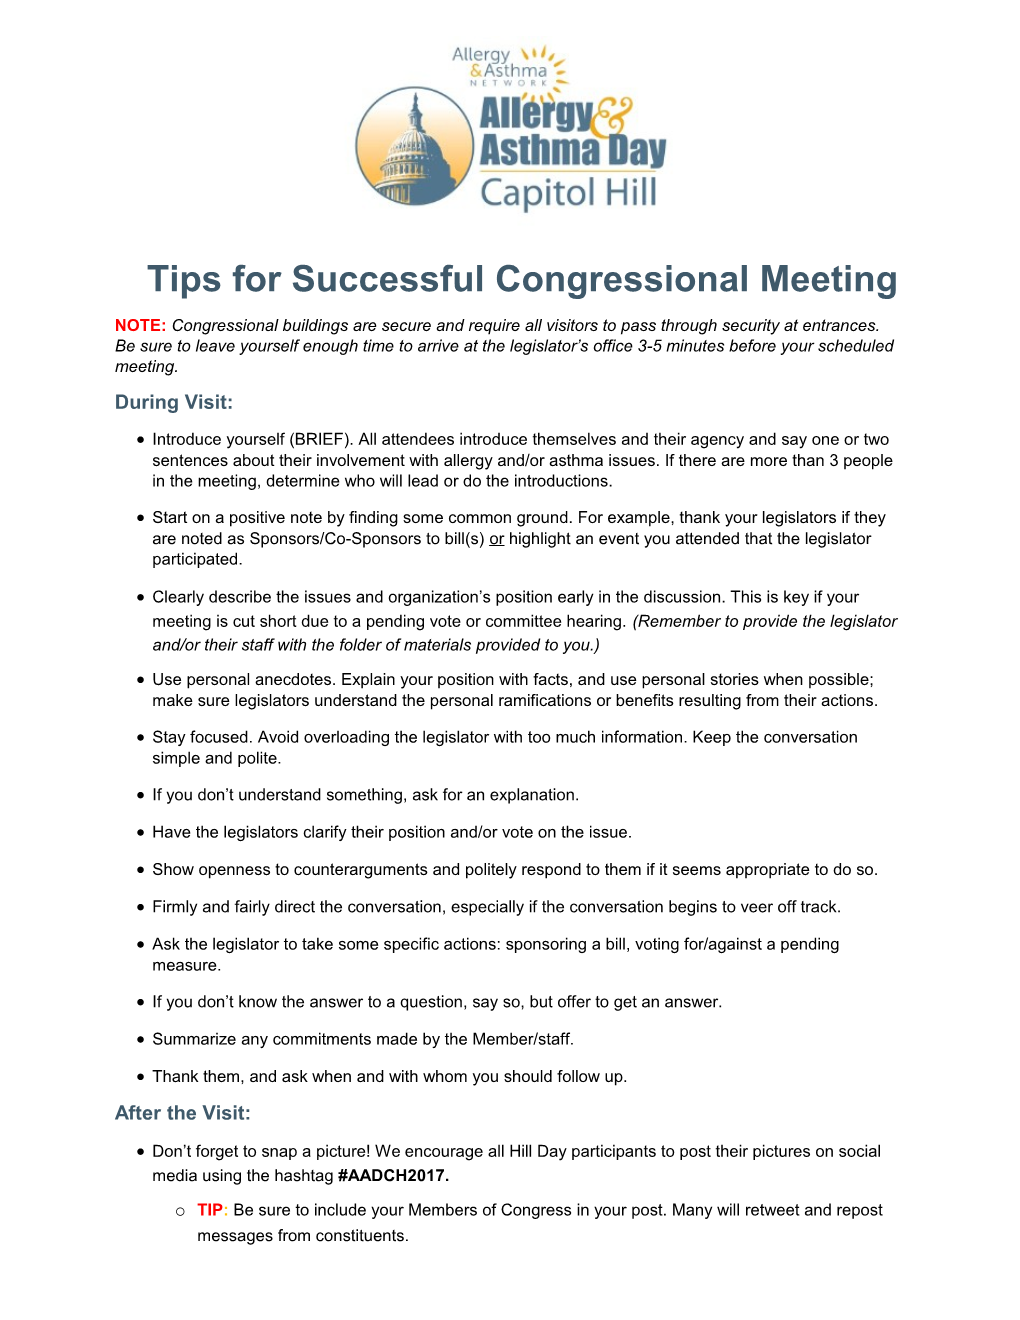 Tips for Successful Congressional Meeting